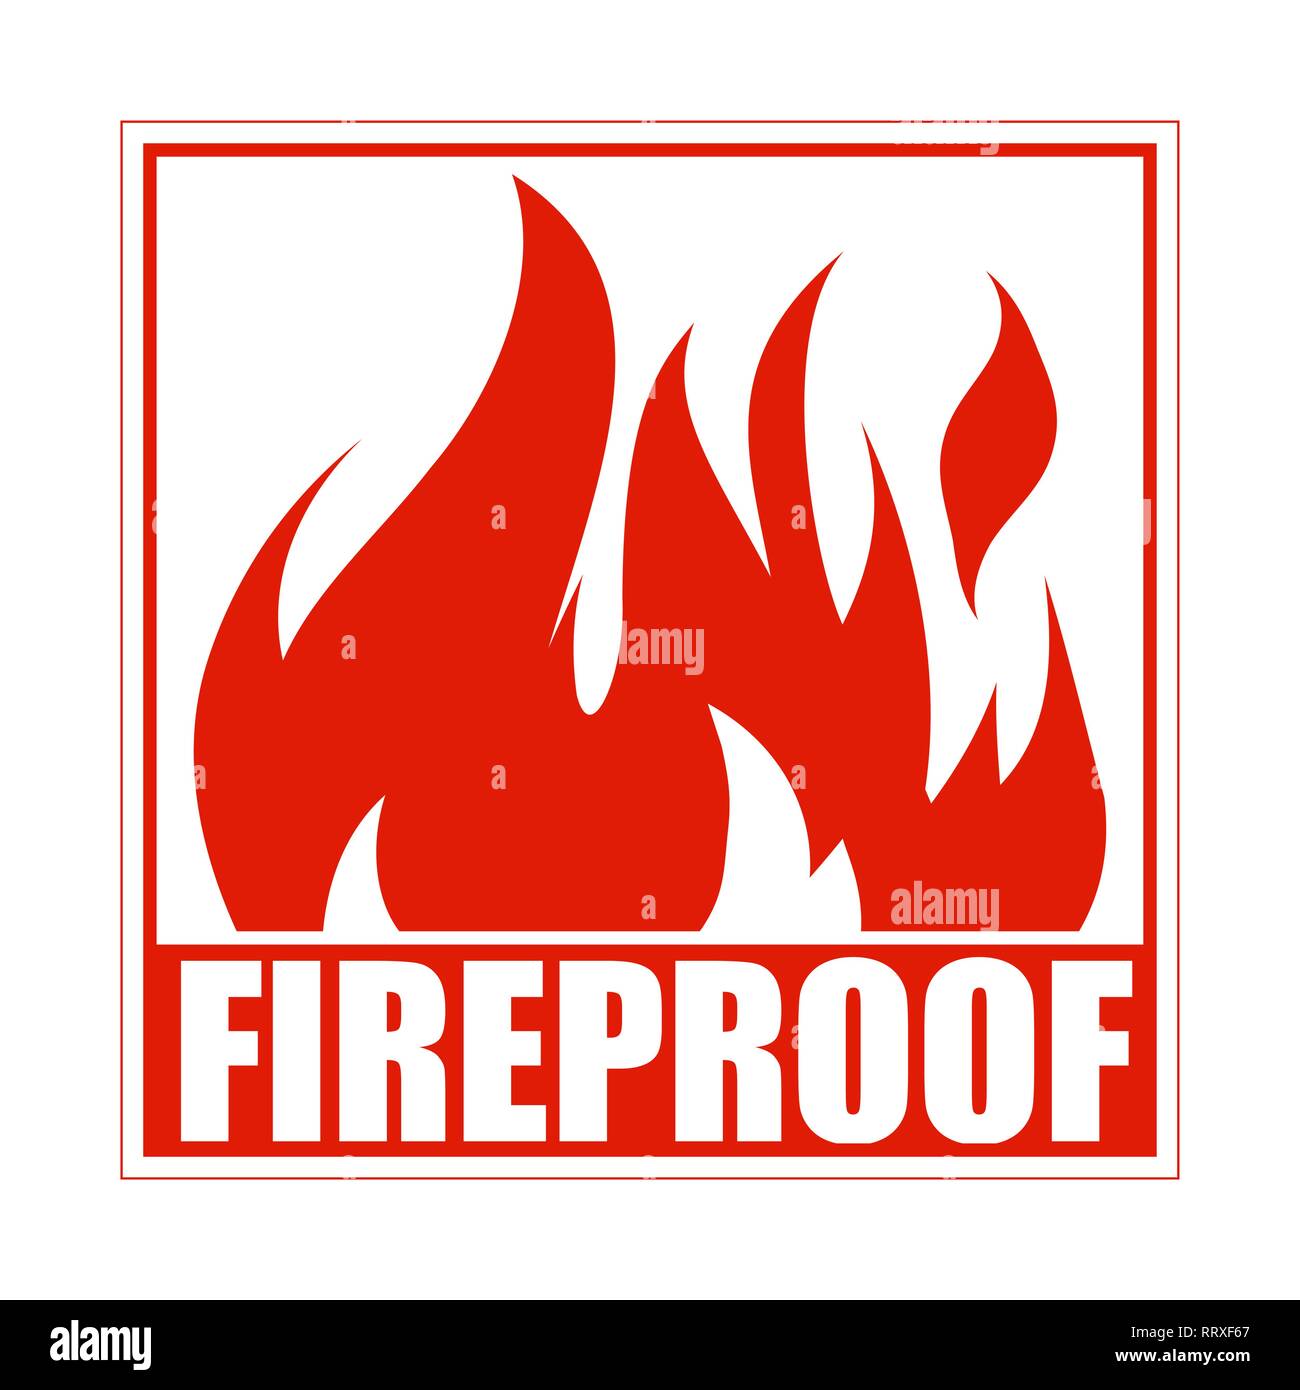 Fireproof square icon, logo design, sign, red label with blazing flame. Stock Vector